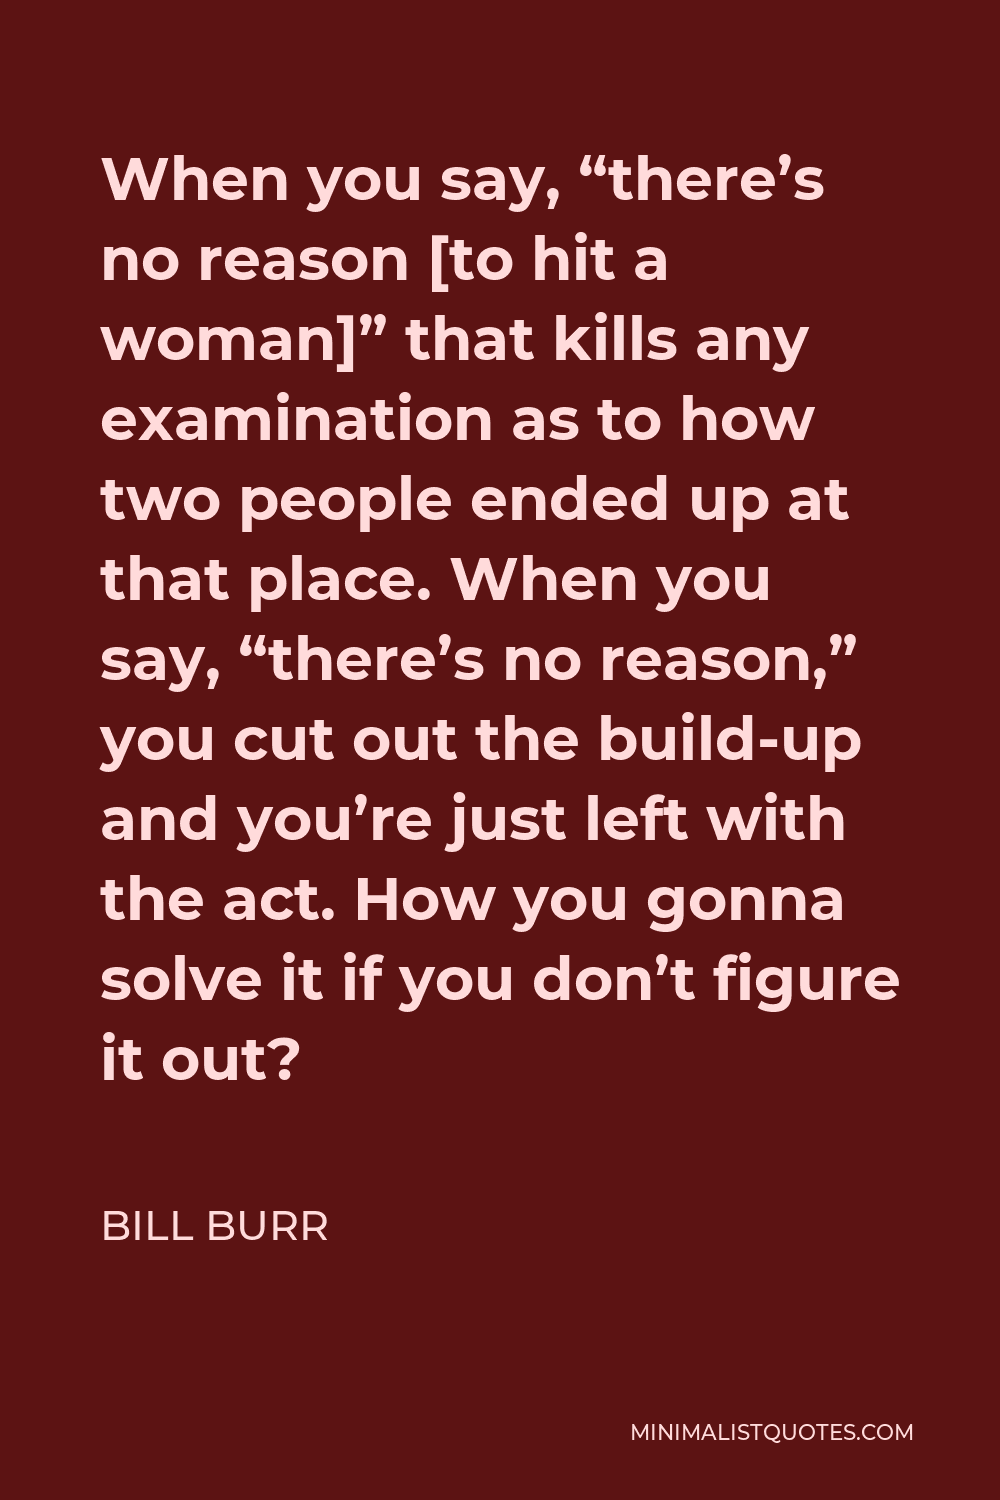 Bill Burr Quote - When you say, “there’s no reason [to hit a woman]” that kills any examination as to how two people ended up at that place. When you say, “there’s no reason,” you cut out the build-up and you’re just left with the act. How you gonna solve it if you don’t figure it out?